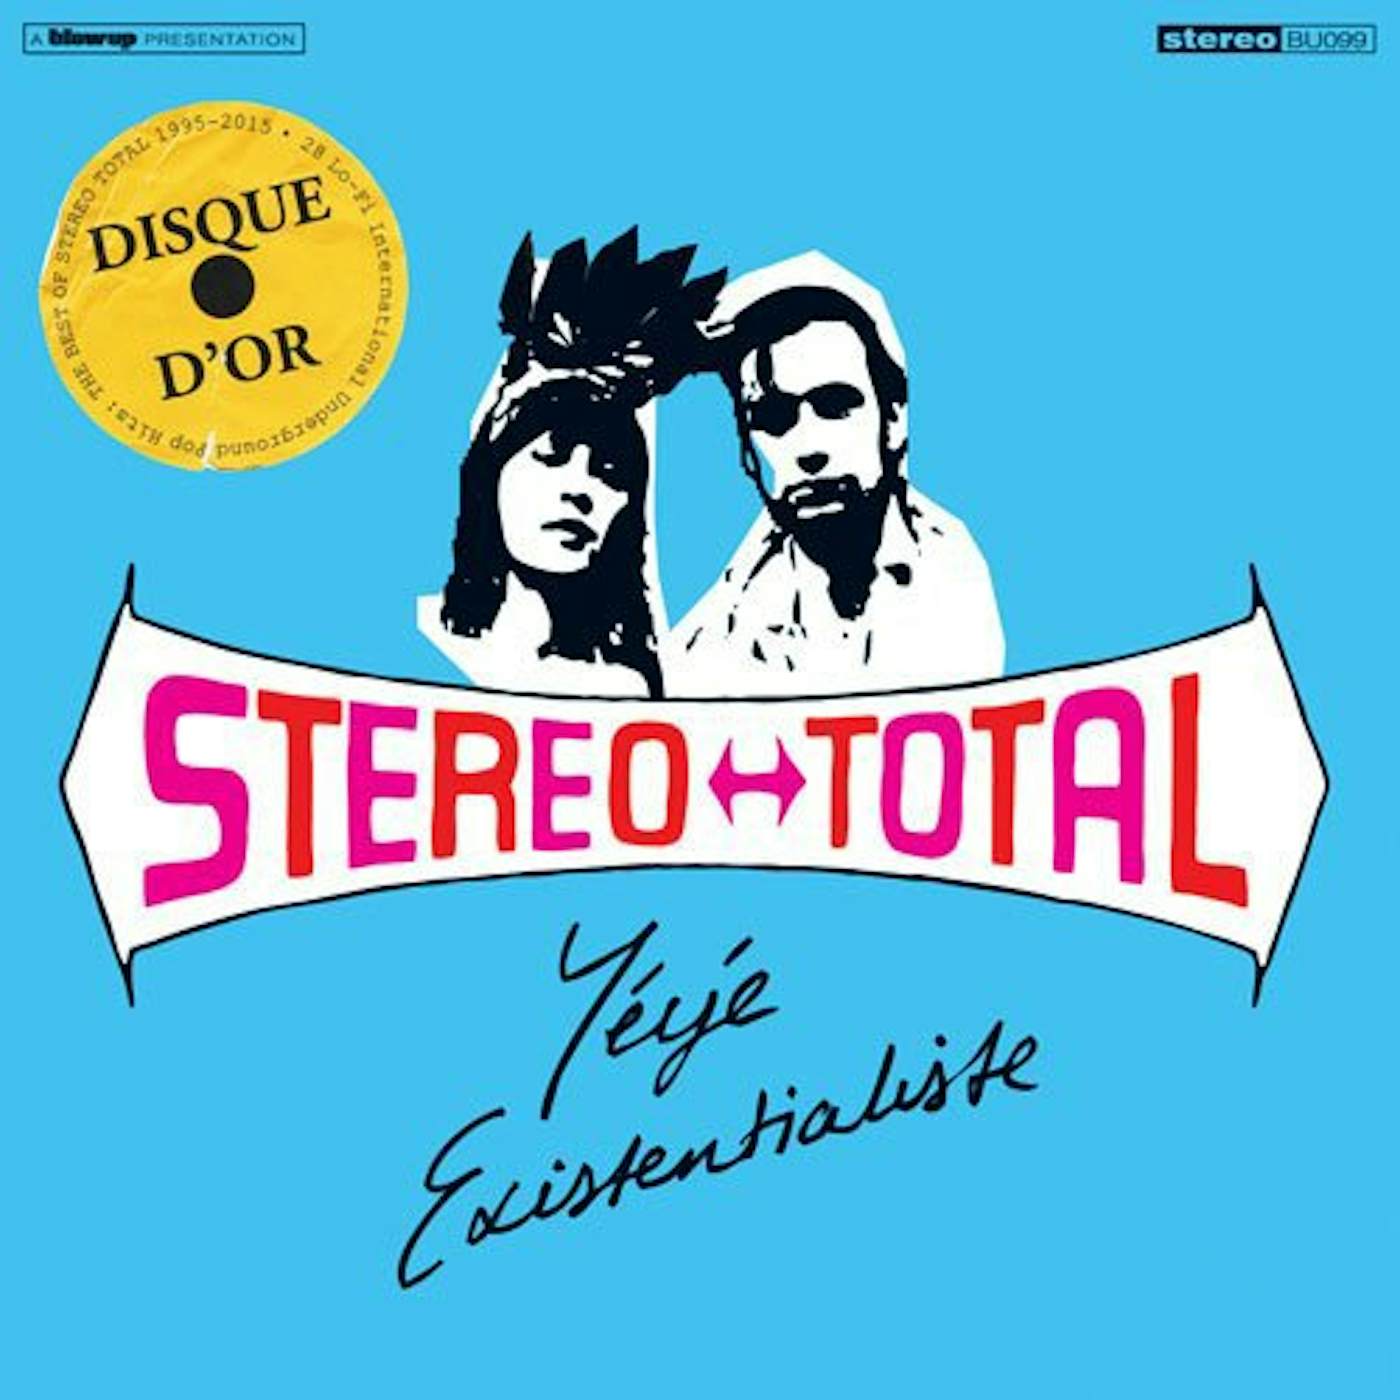 Stereo Total YEYE EXISTENTIALISTE CD